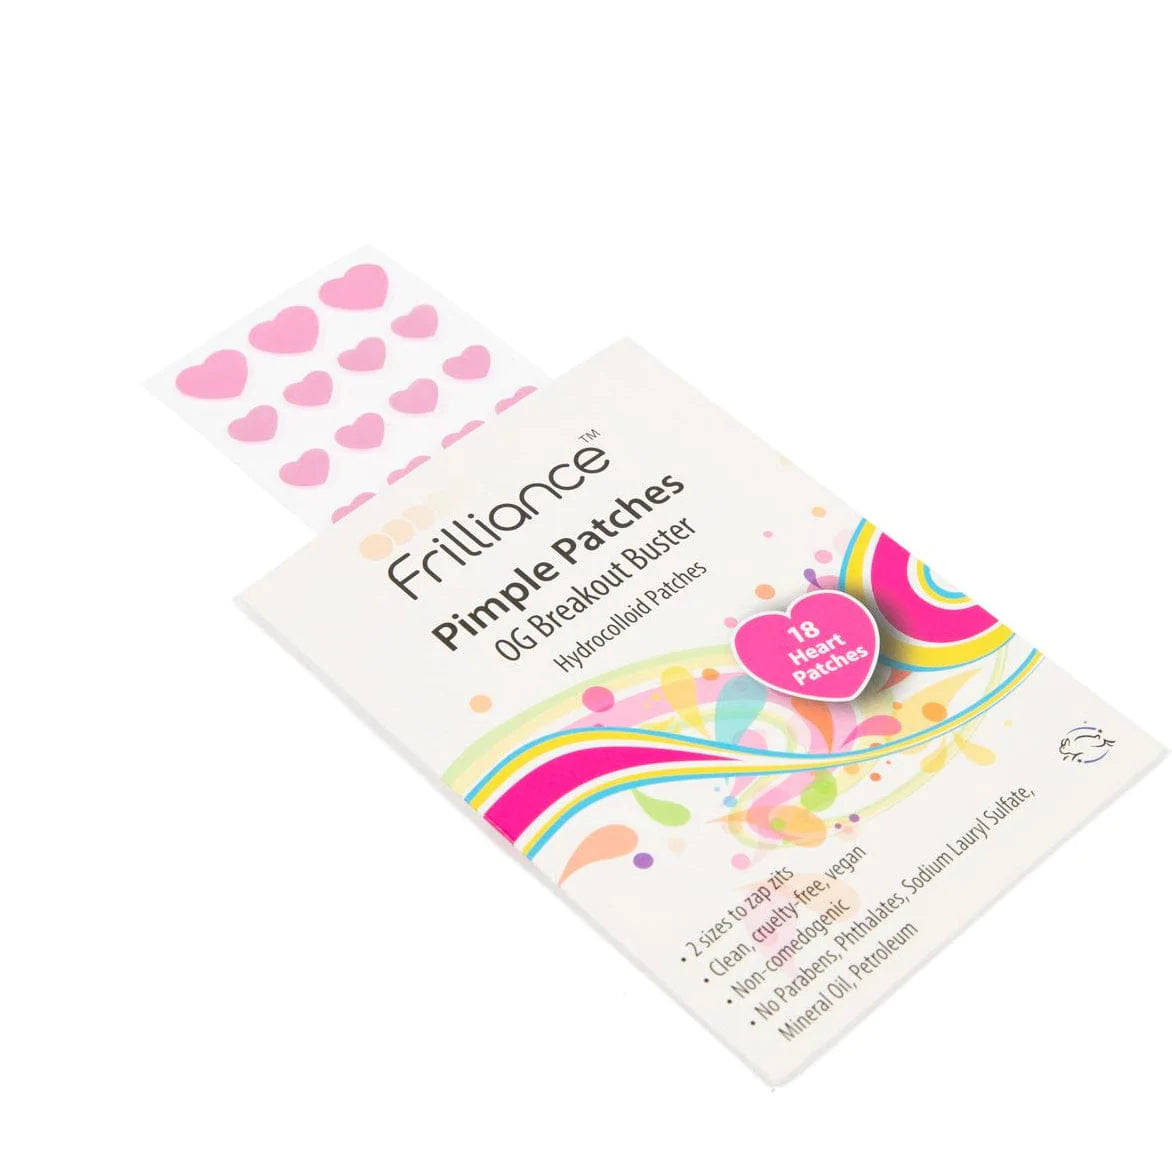 Frilliance Pimple Patches - OG Pink Heart Breakout Busters (18 ct/2 sizes)